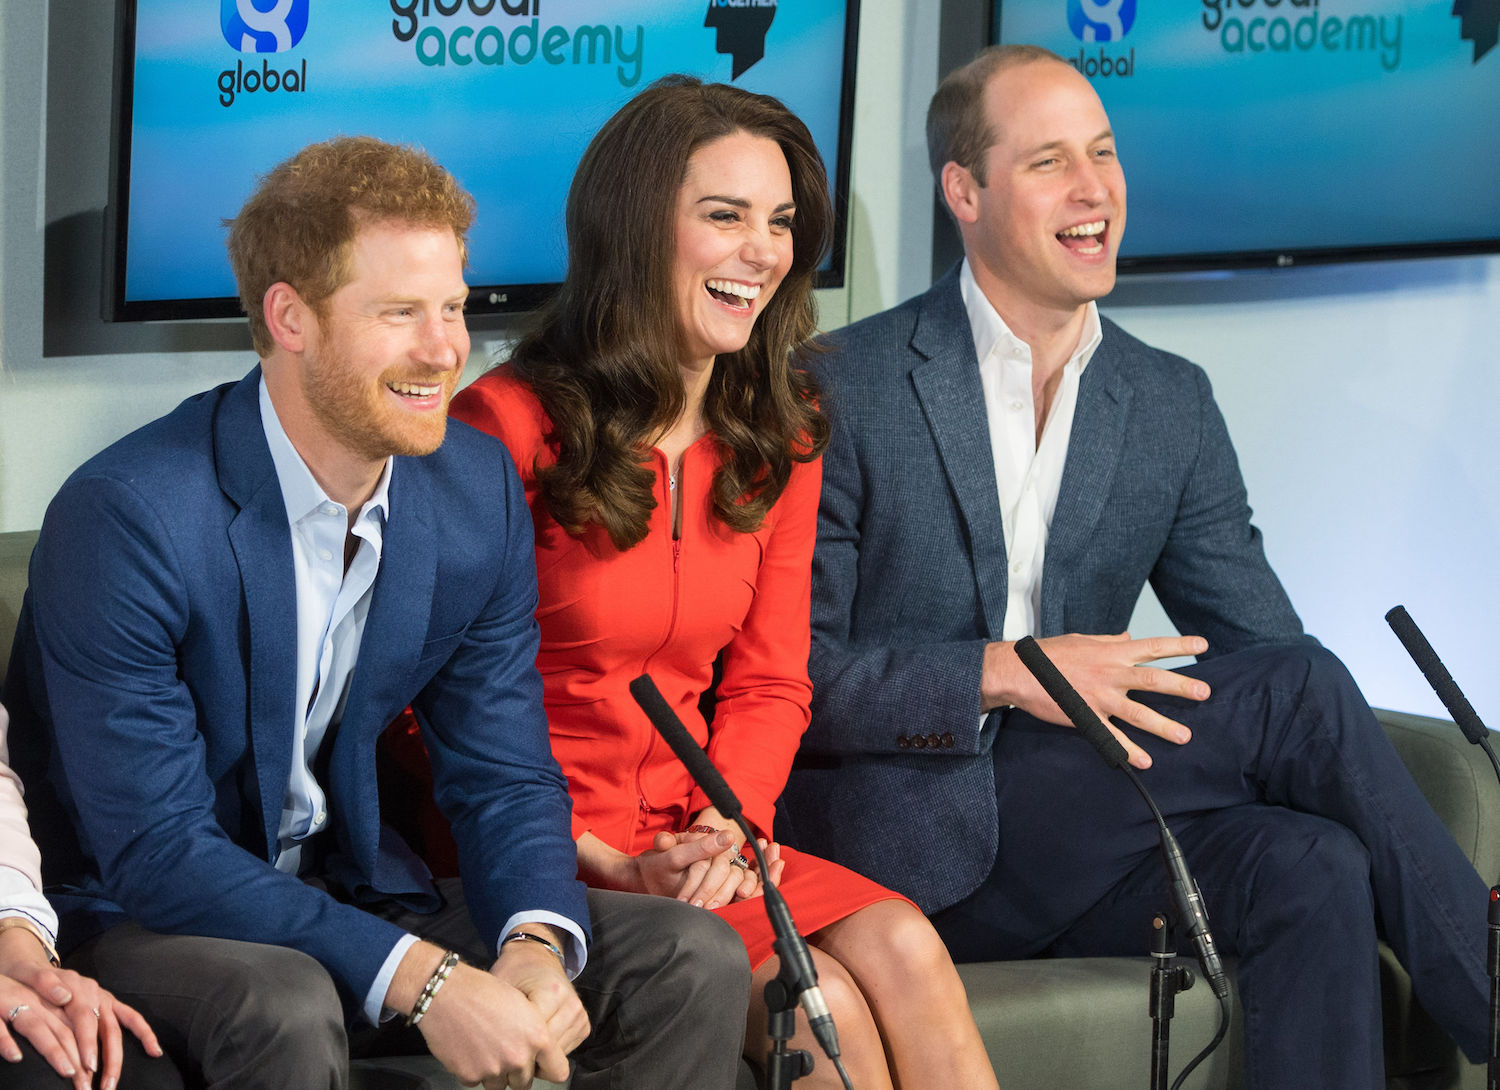 Prince Harry, Prince William, and Kate Middleton’s Body Language Became ‘Forced and Fake’ Over the Years, Expert Says